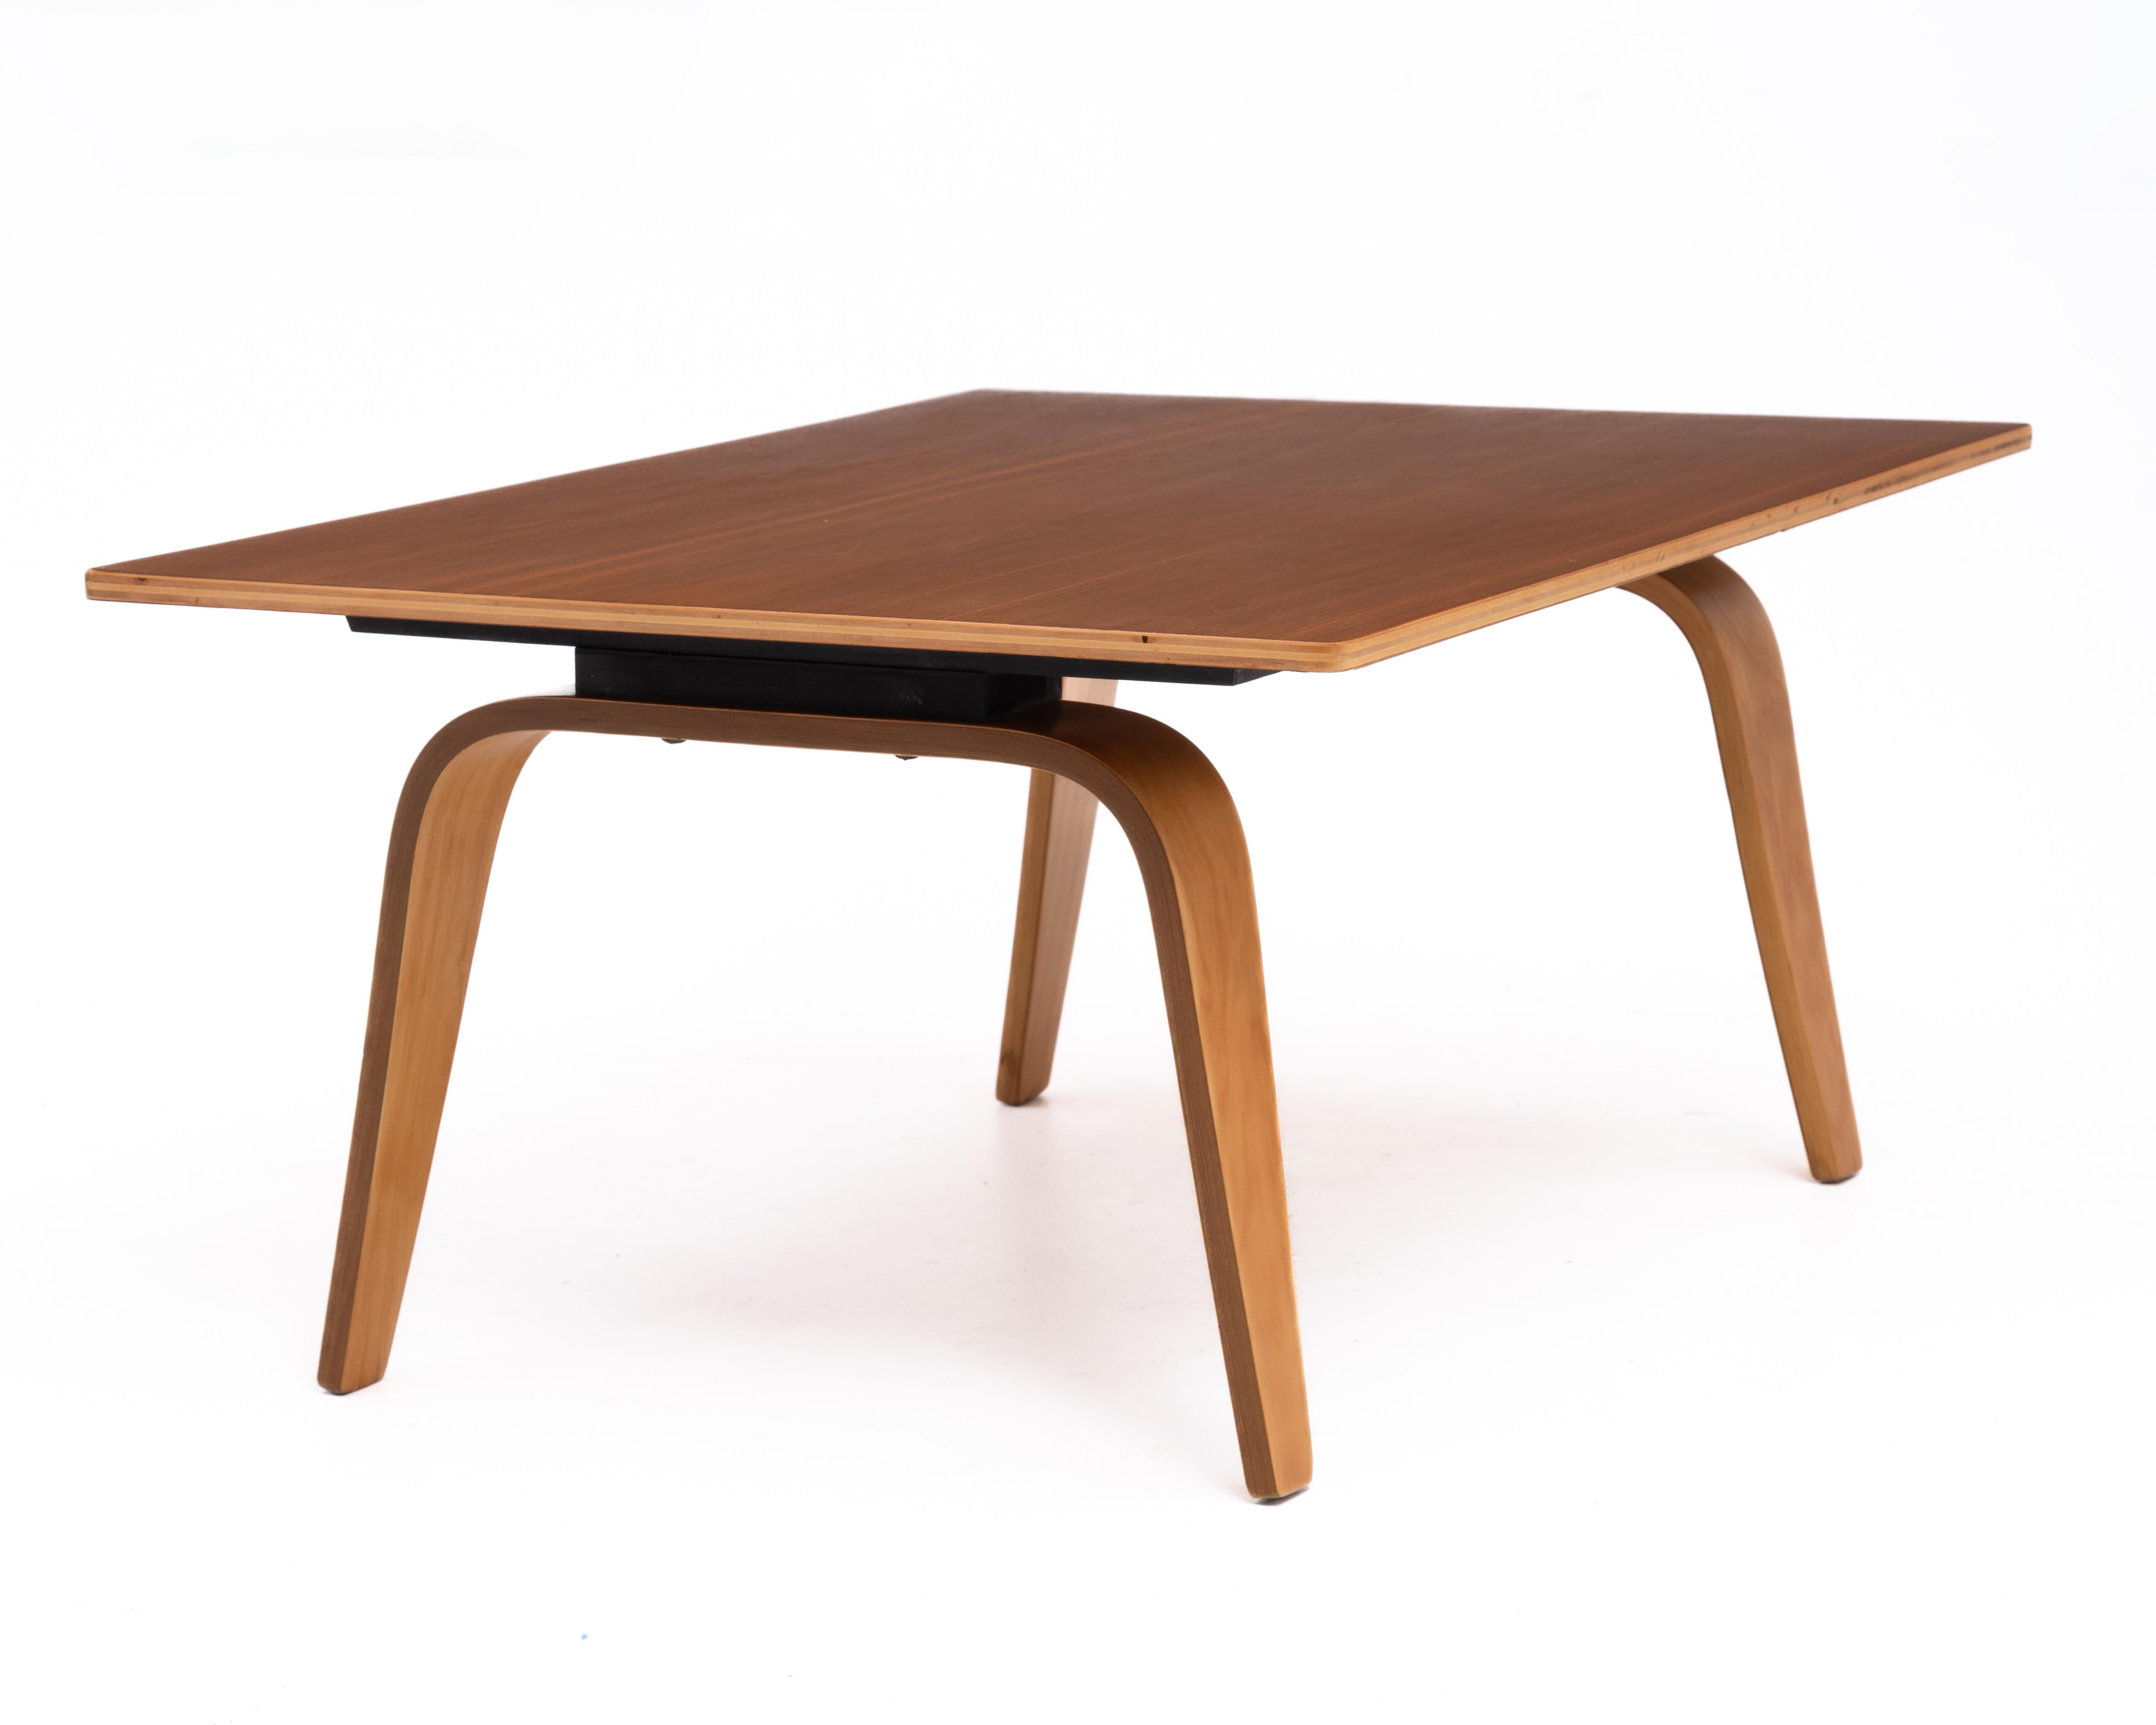 Charles Ray Eames Evans Plywood Company CTW1 OTW Oblong Table Wood Walnut Birch In Good Condition For Sale In Forest Grove, PA